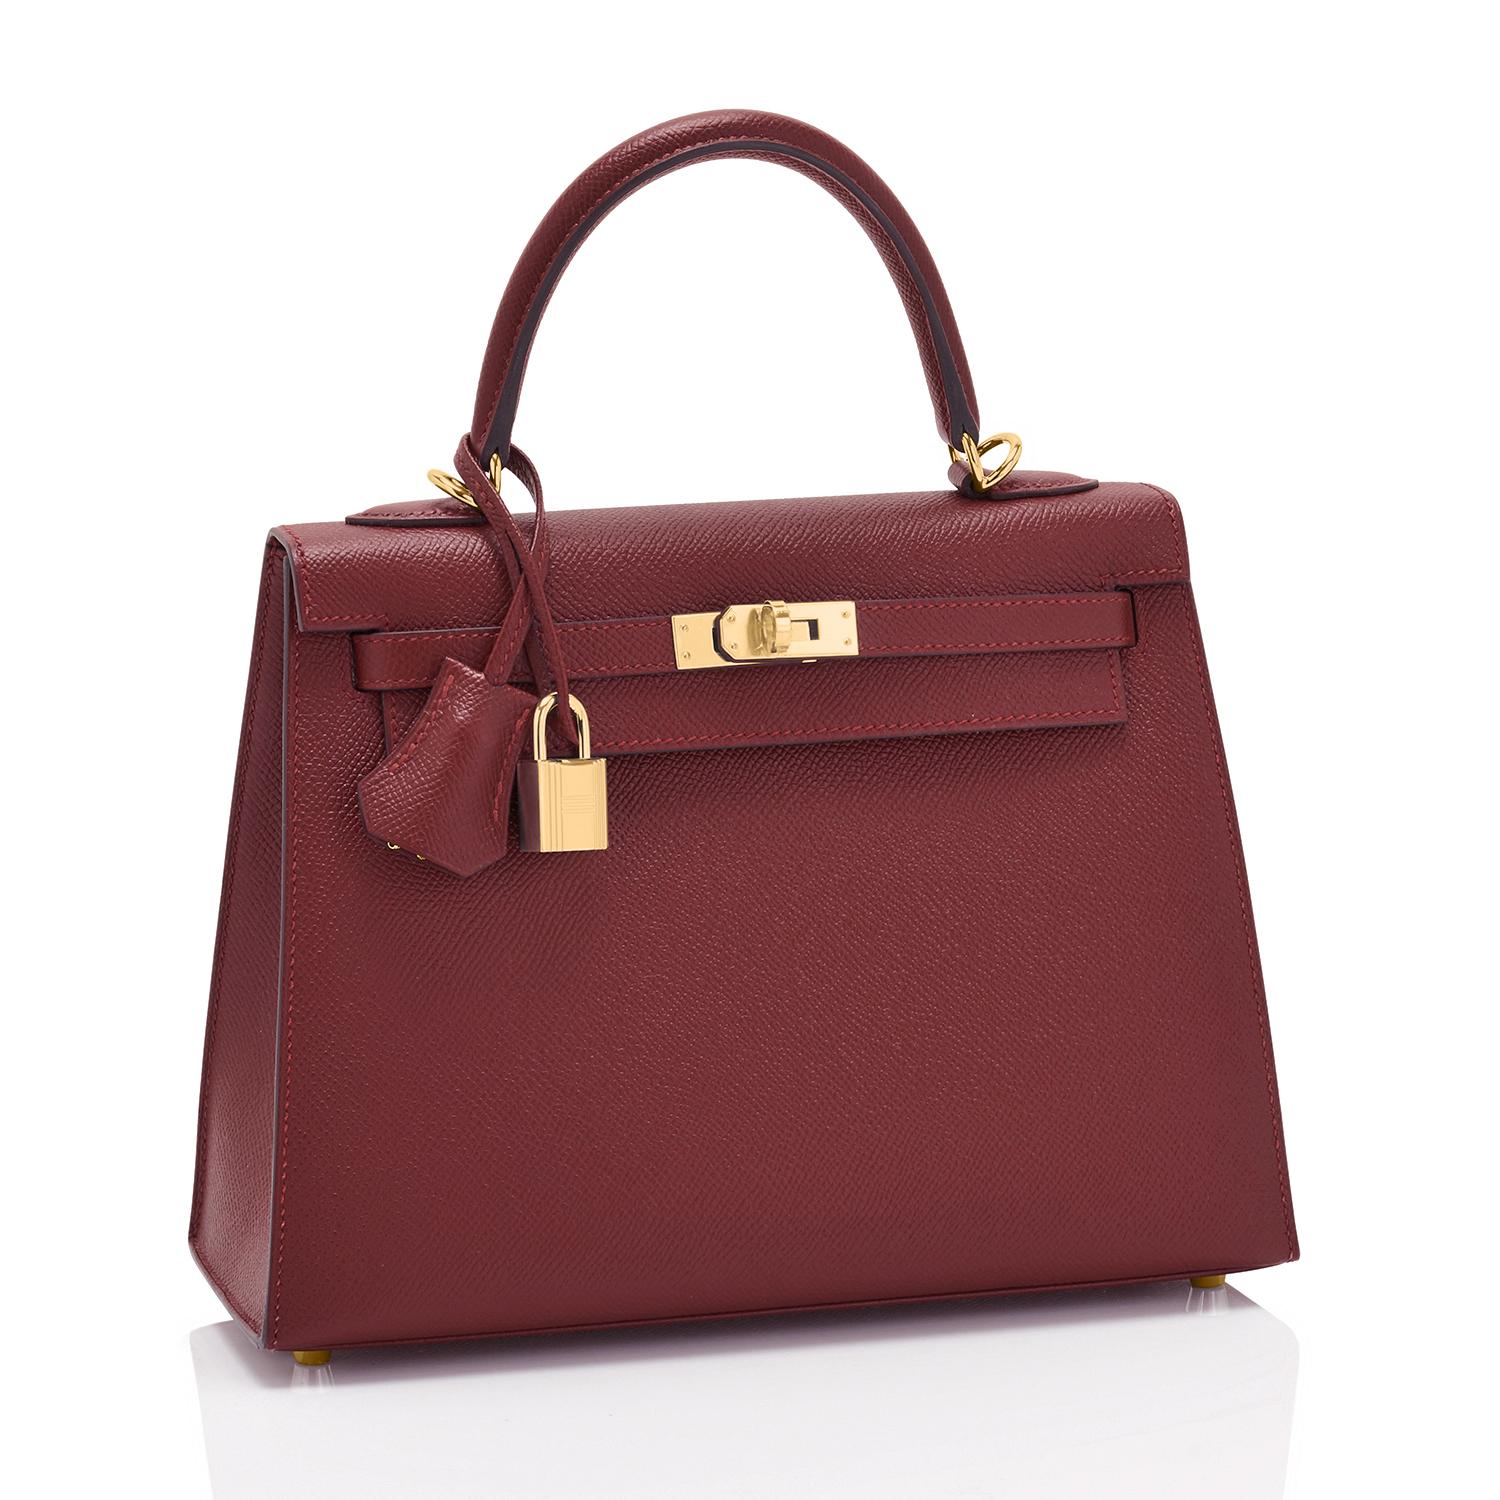 Hermes Kelly 25cm Rouge H Hermes Epsom Sellier Gold Hardware Y Stamp, 2020
Brand New in Box. Store Fresh. Pristine Condition (with plastic on hardware). 
Just purchased from Hermes store; bag bears new interior 2020 Y stamp. 
Perfect gift!  Comes